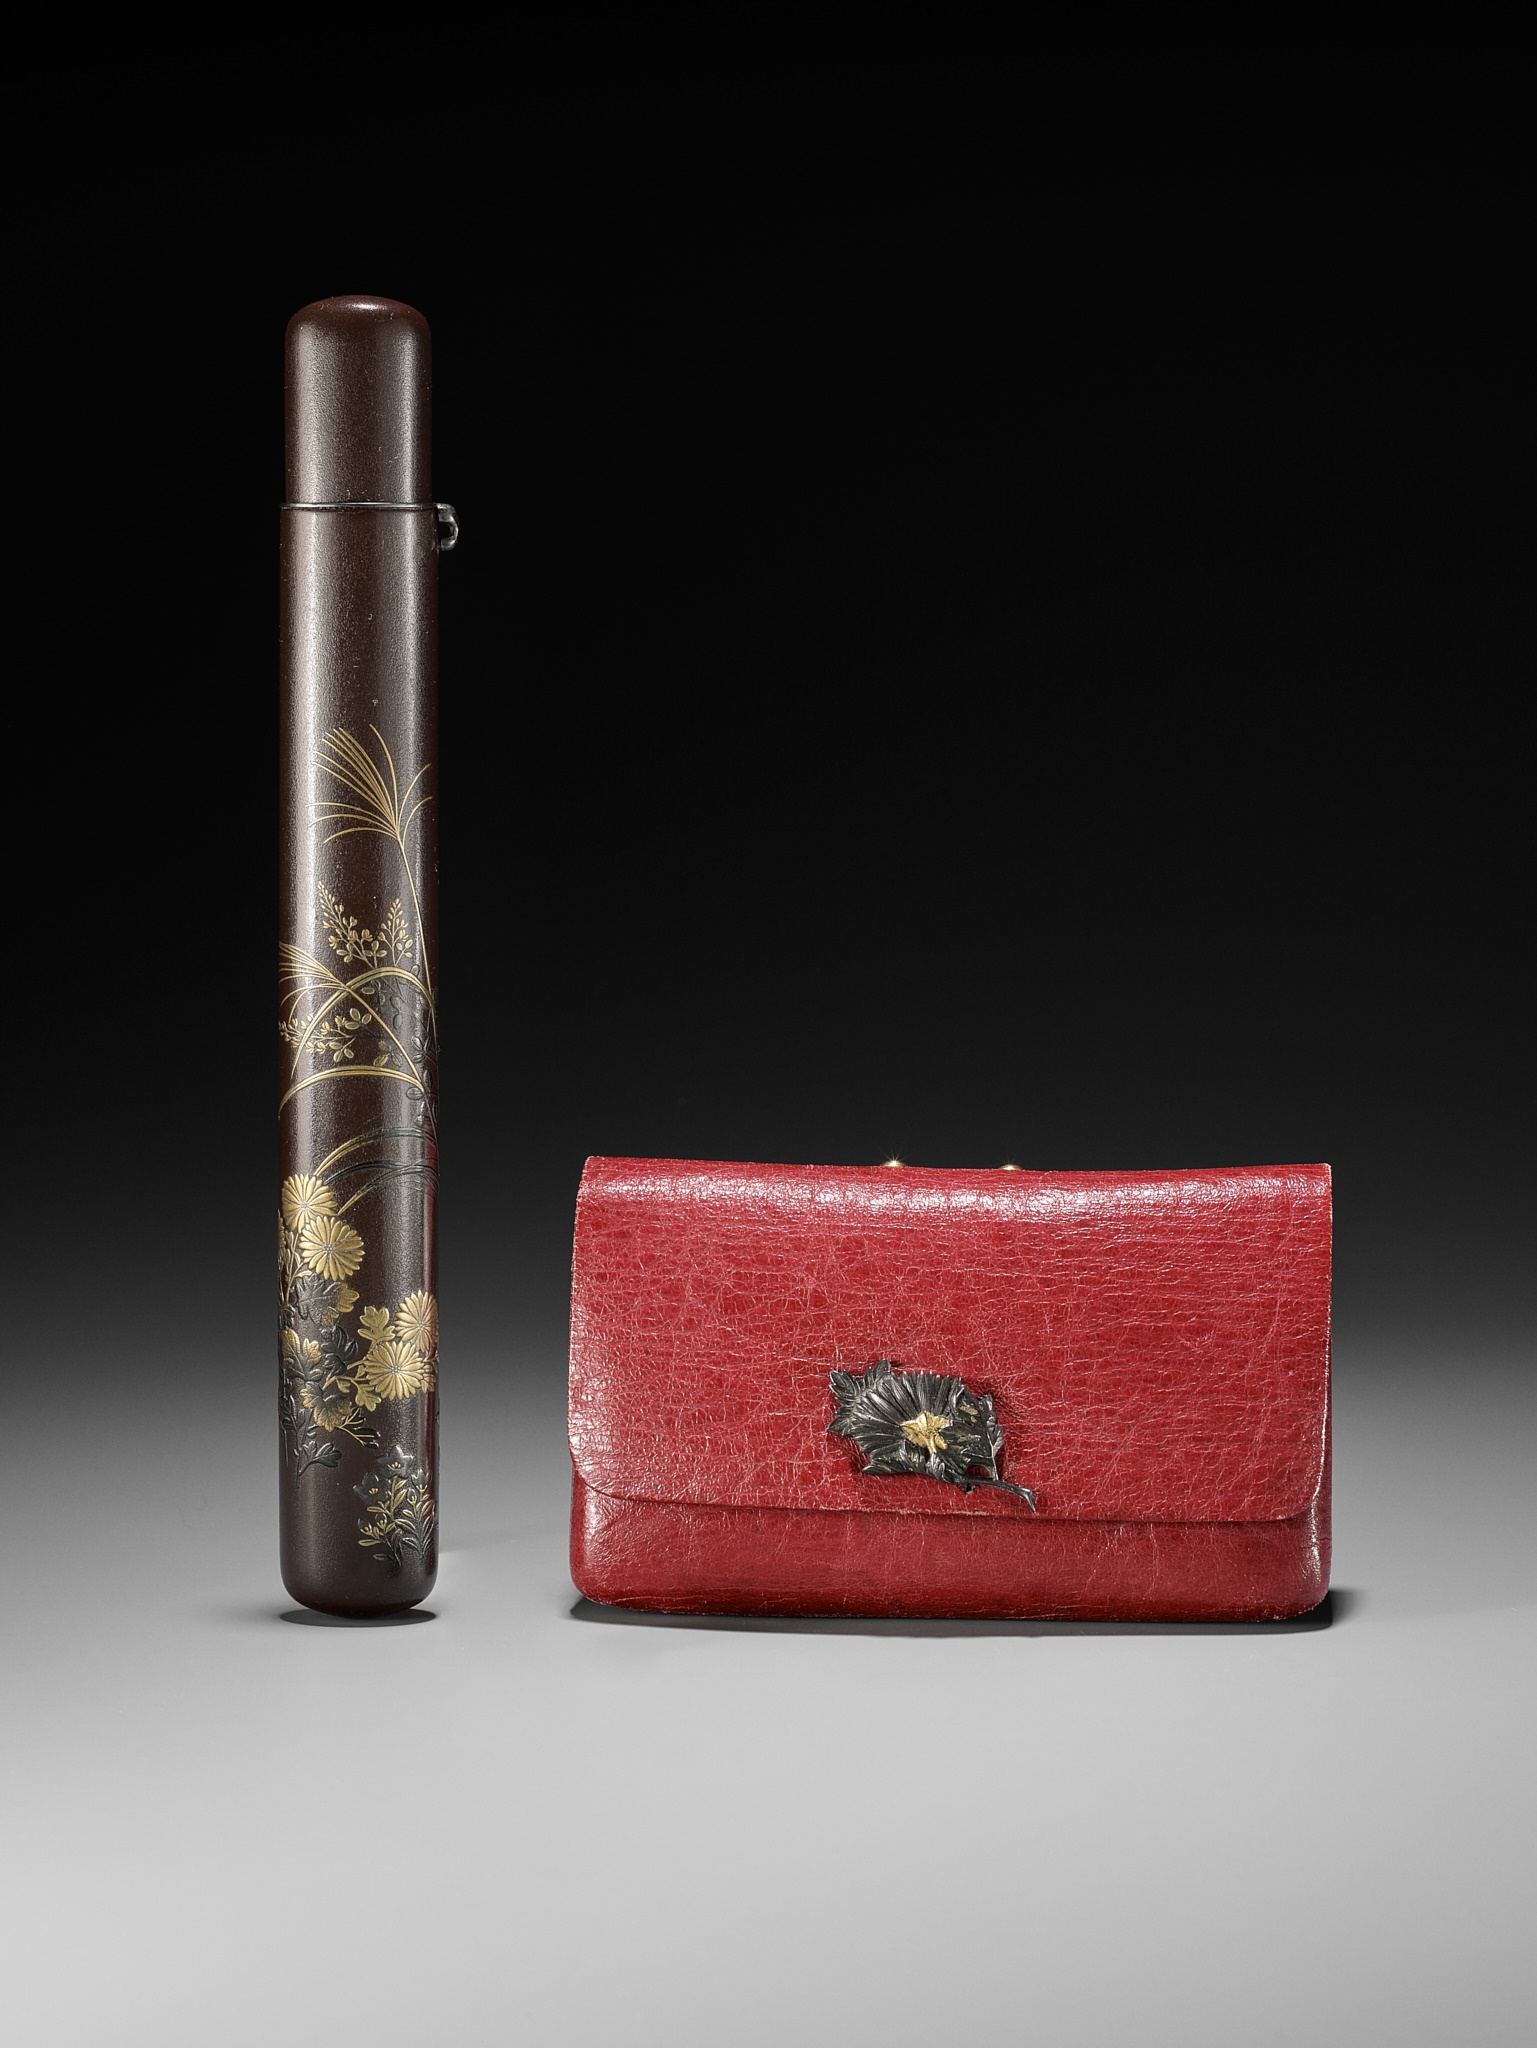 A LACQUER KISERUZUTSU AND A RED LEATHER POUCH DEPICTING AUTUMN GRASSES AND FLOWERS